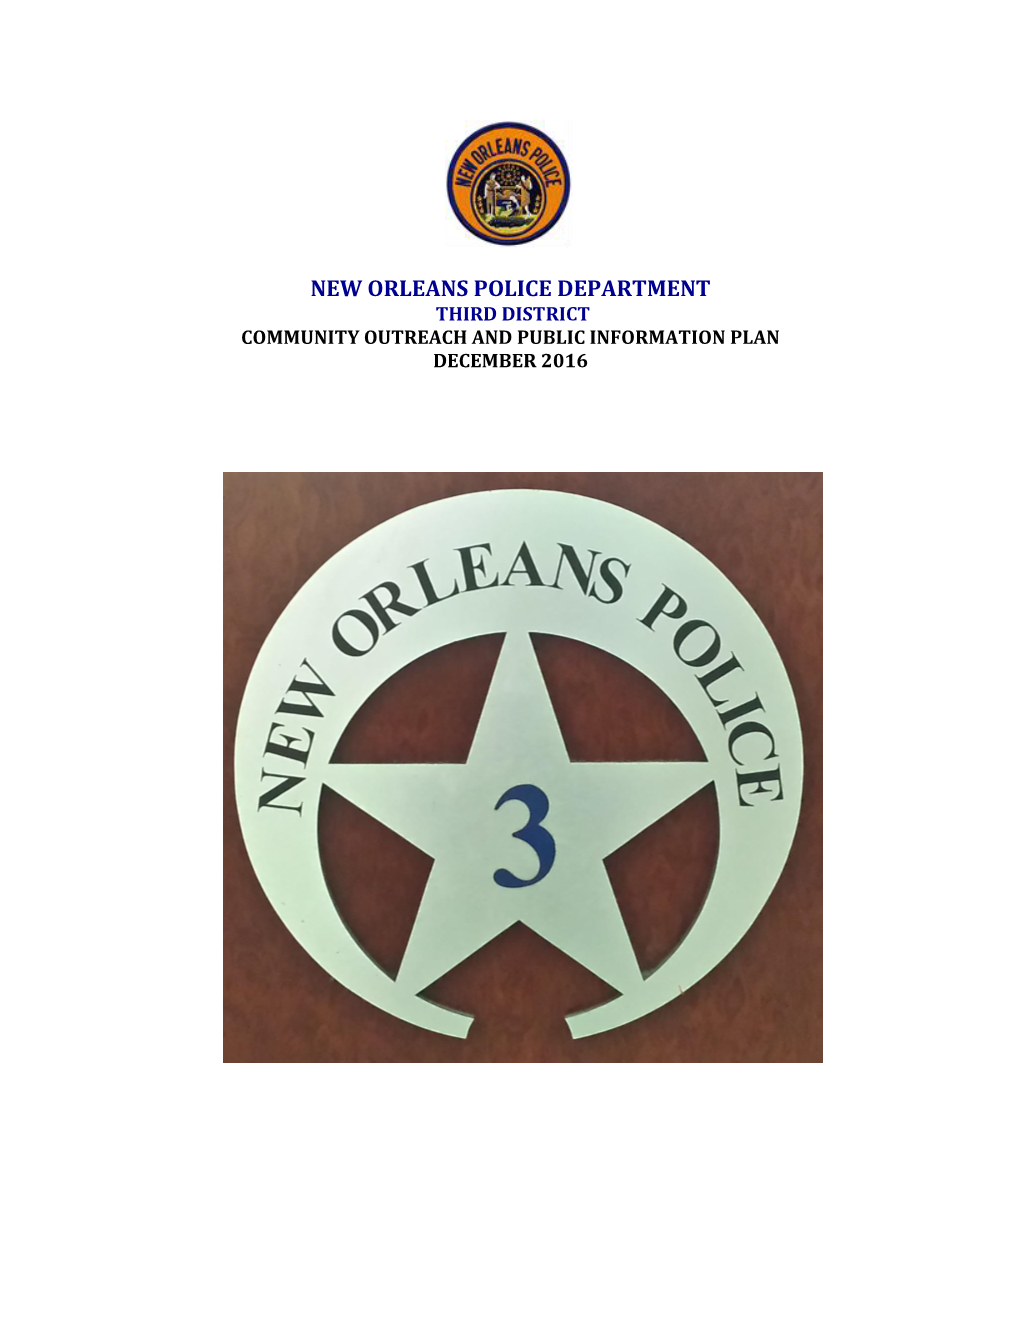 New Orleans Police Department Third District Community Outreach and Public Information Plan December 2016